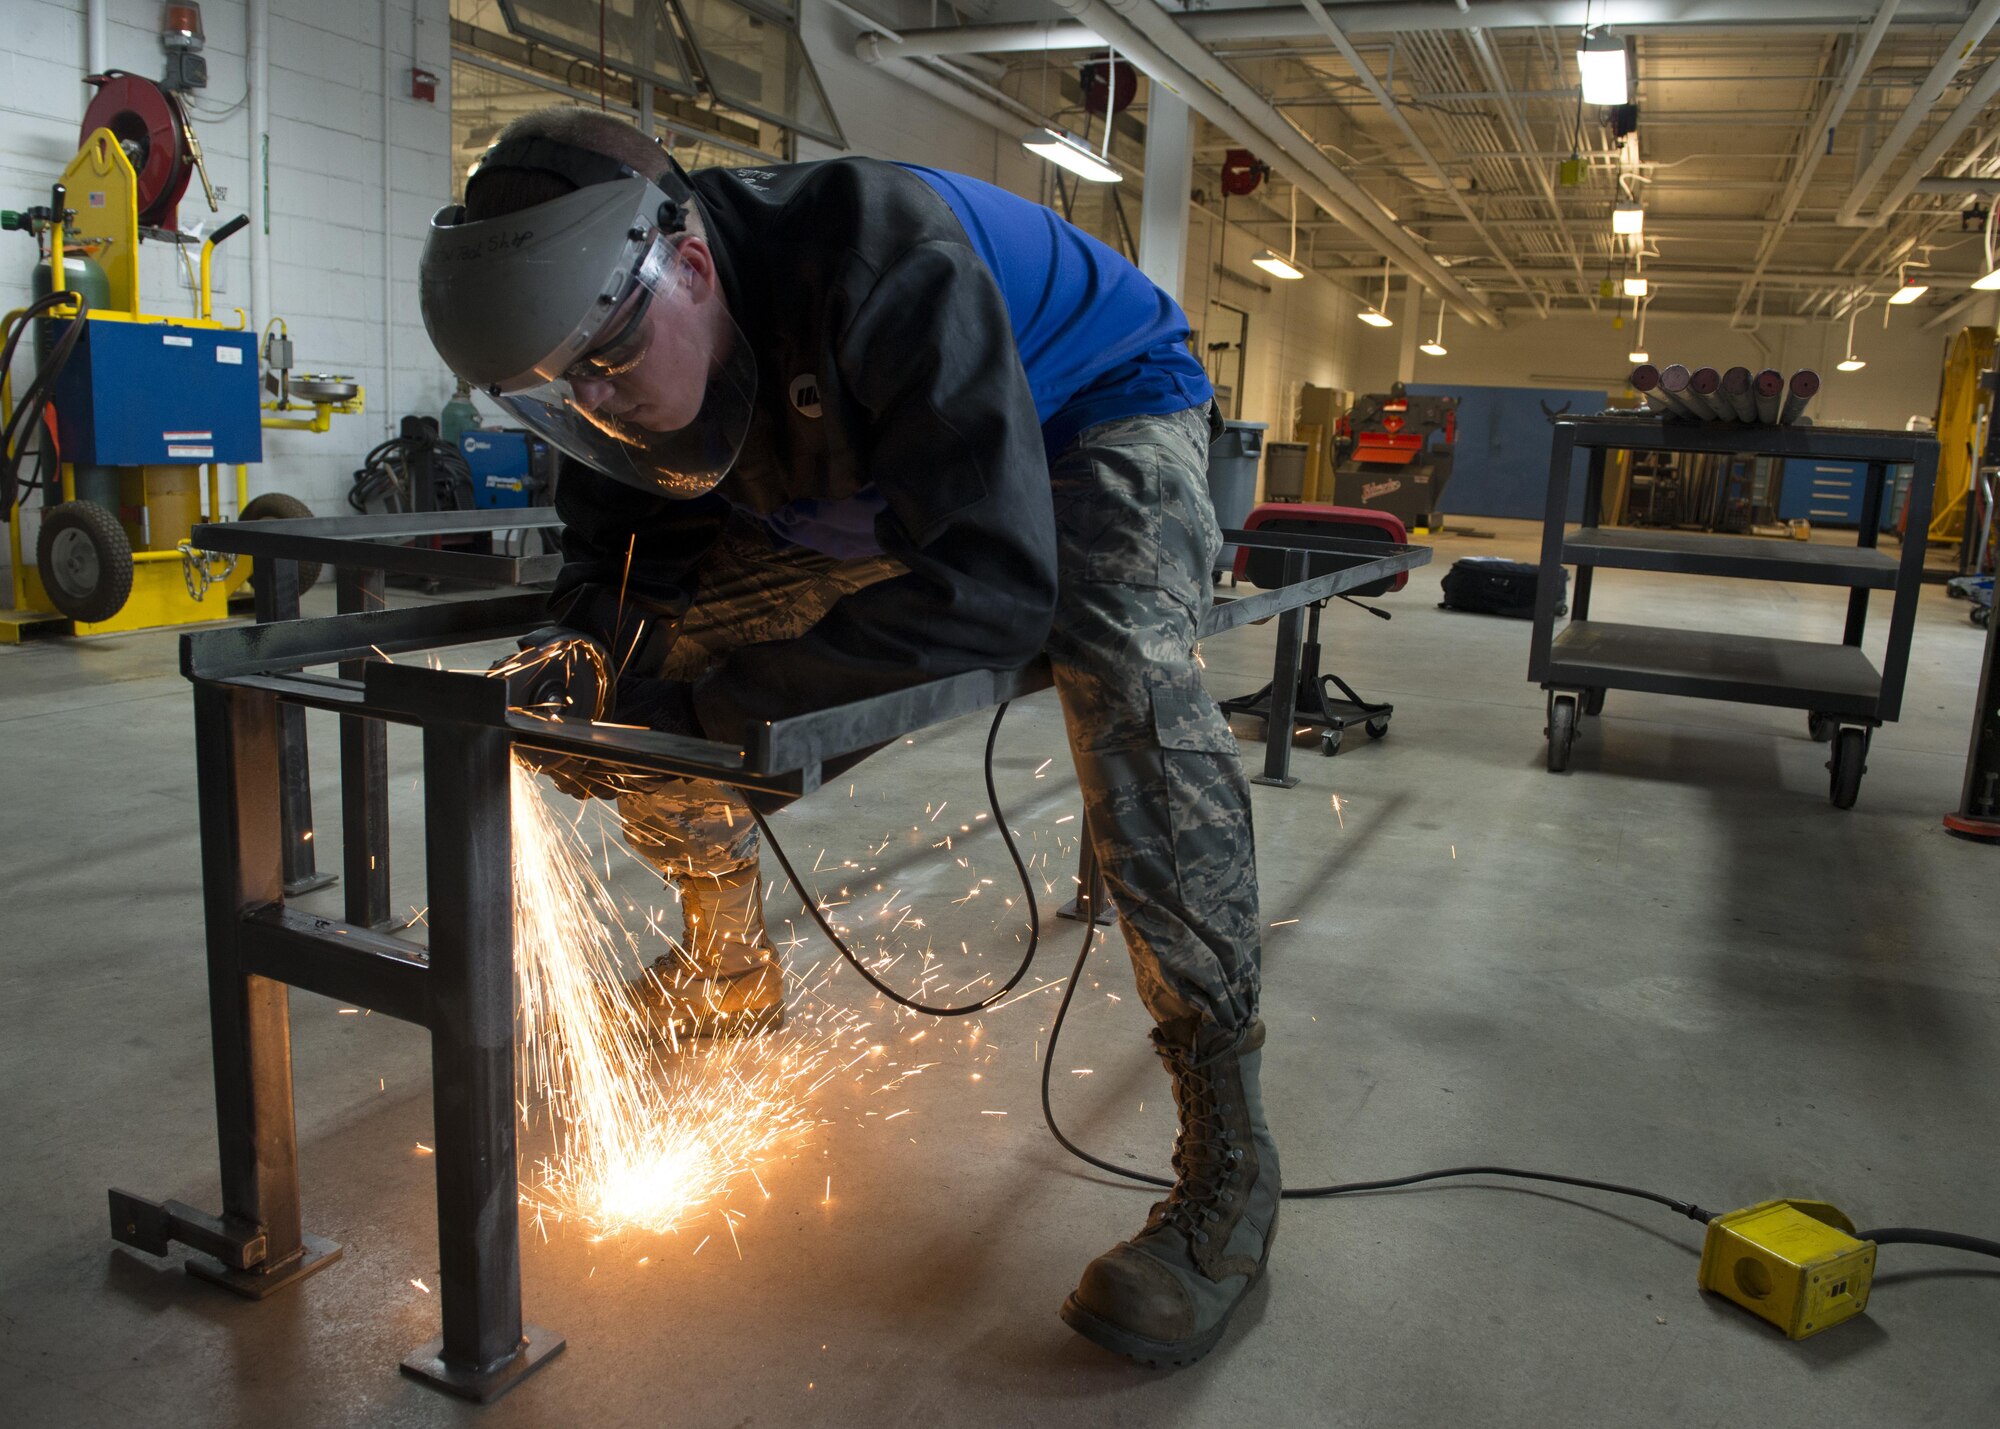 Senior Airman Cory Swan, 512th Maintenance Squadron metals technician, uses an angle grinder to remove a piece of metal from a metal frame Sept. 19, 2016, at Dover Air Force Base, Del. The Metals Technology Shop supported the Air Force Mortuary Affairs Operations mission by designing and building frames for their new transfer vehicles. (U.S. Air Force photo by Senior Airman Zachary Cacicia)